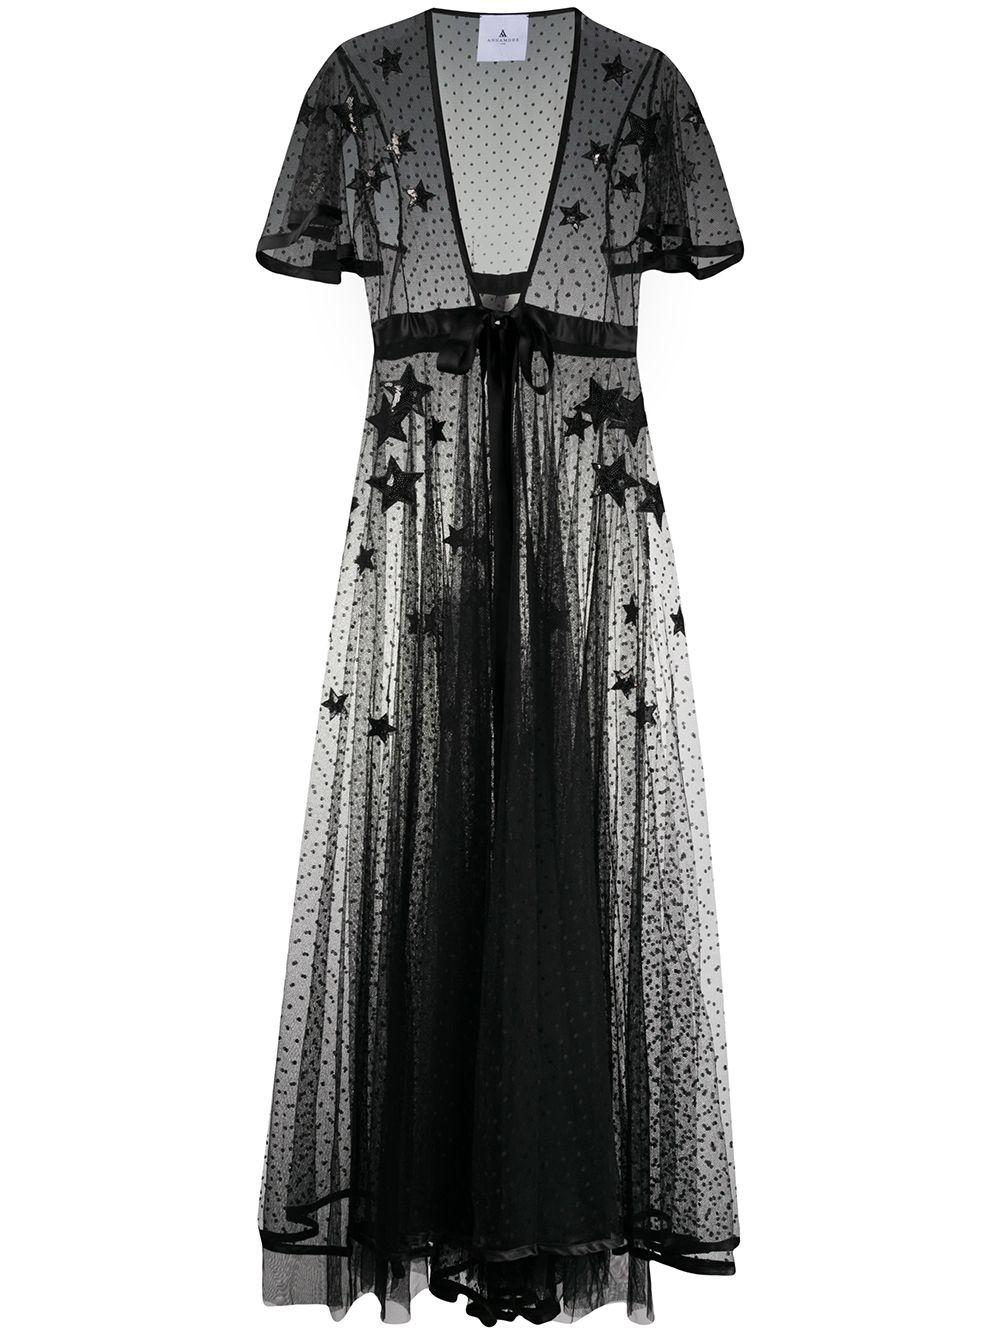 silk star embroidered sheer dress by ANNAMODE